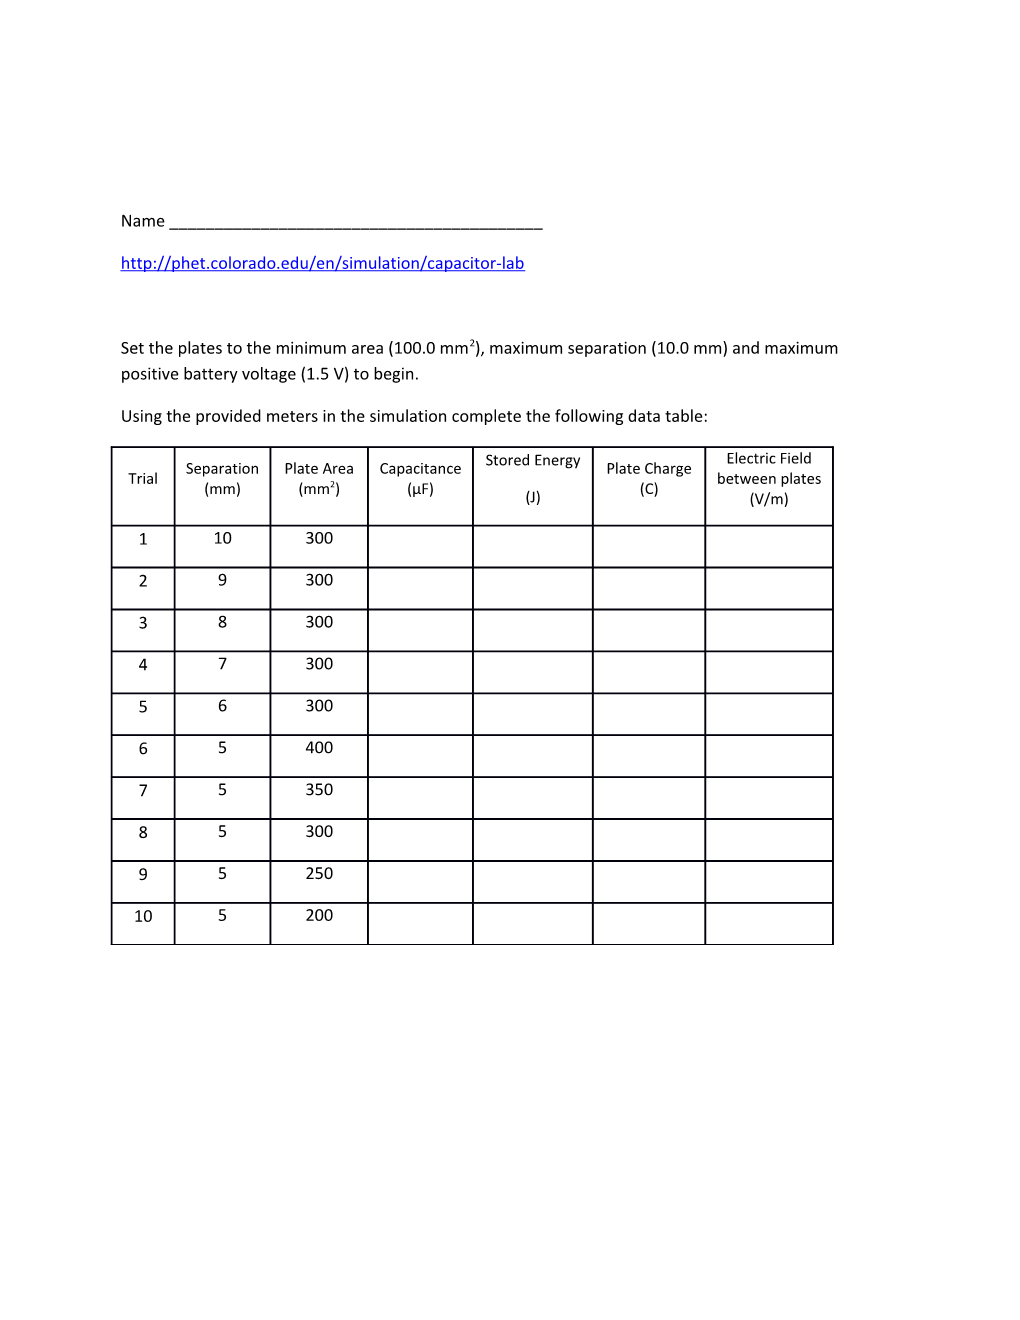 Using the Provided Meters in the Simulation Complete the Following Data Table